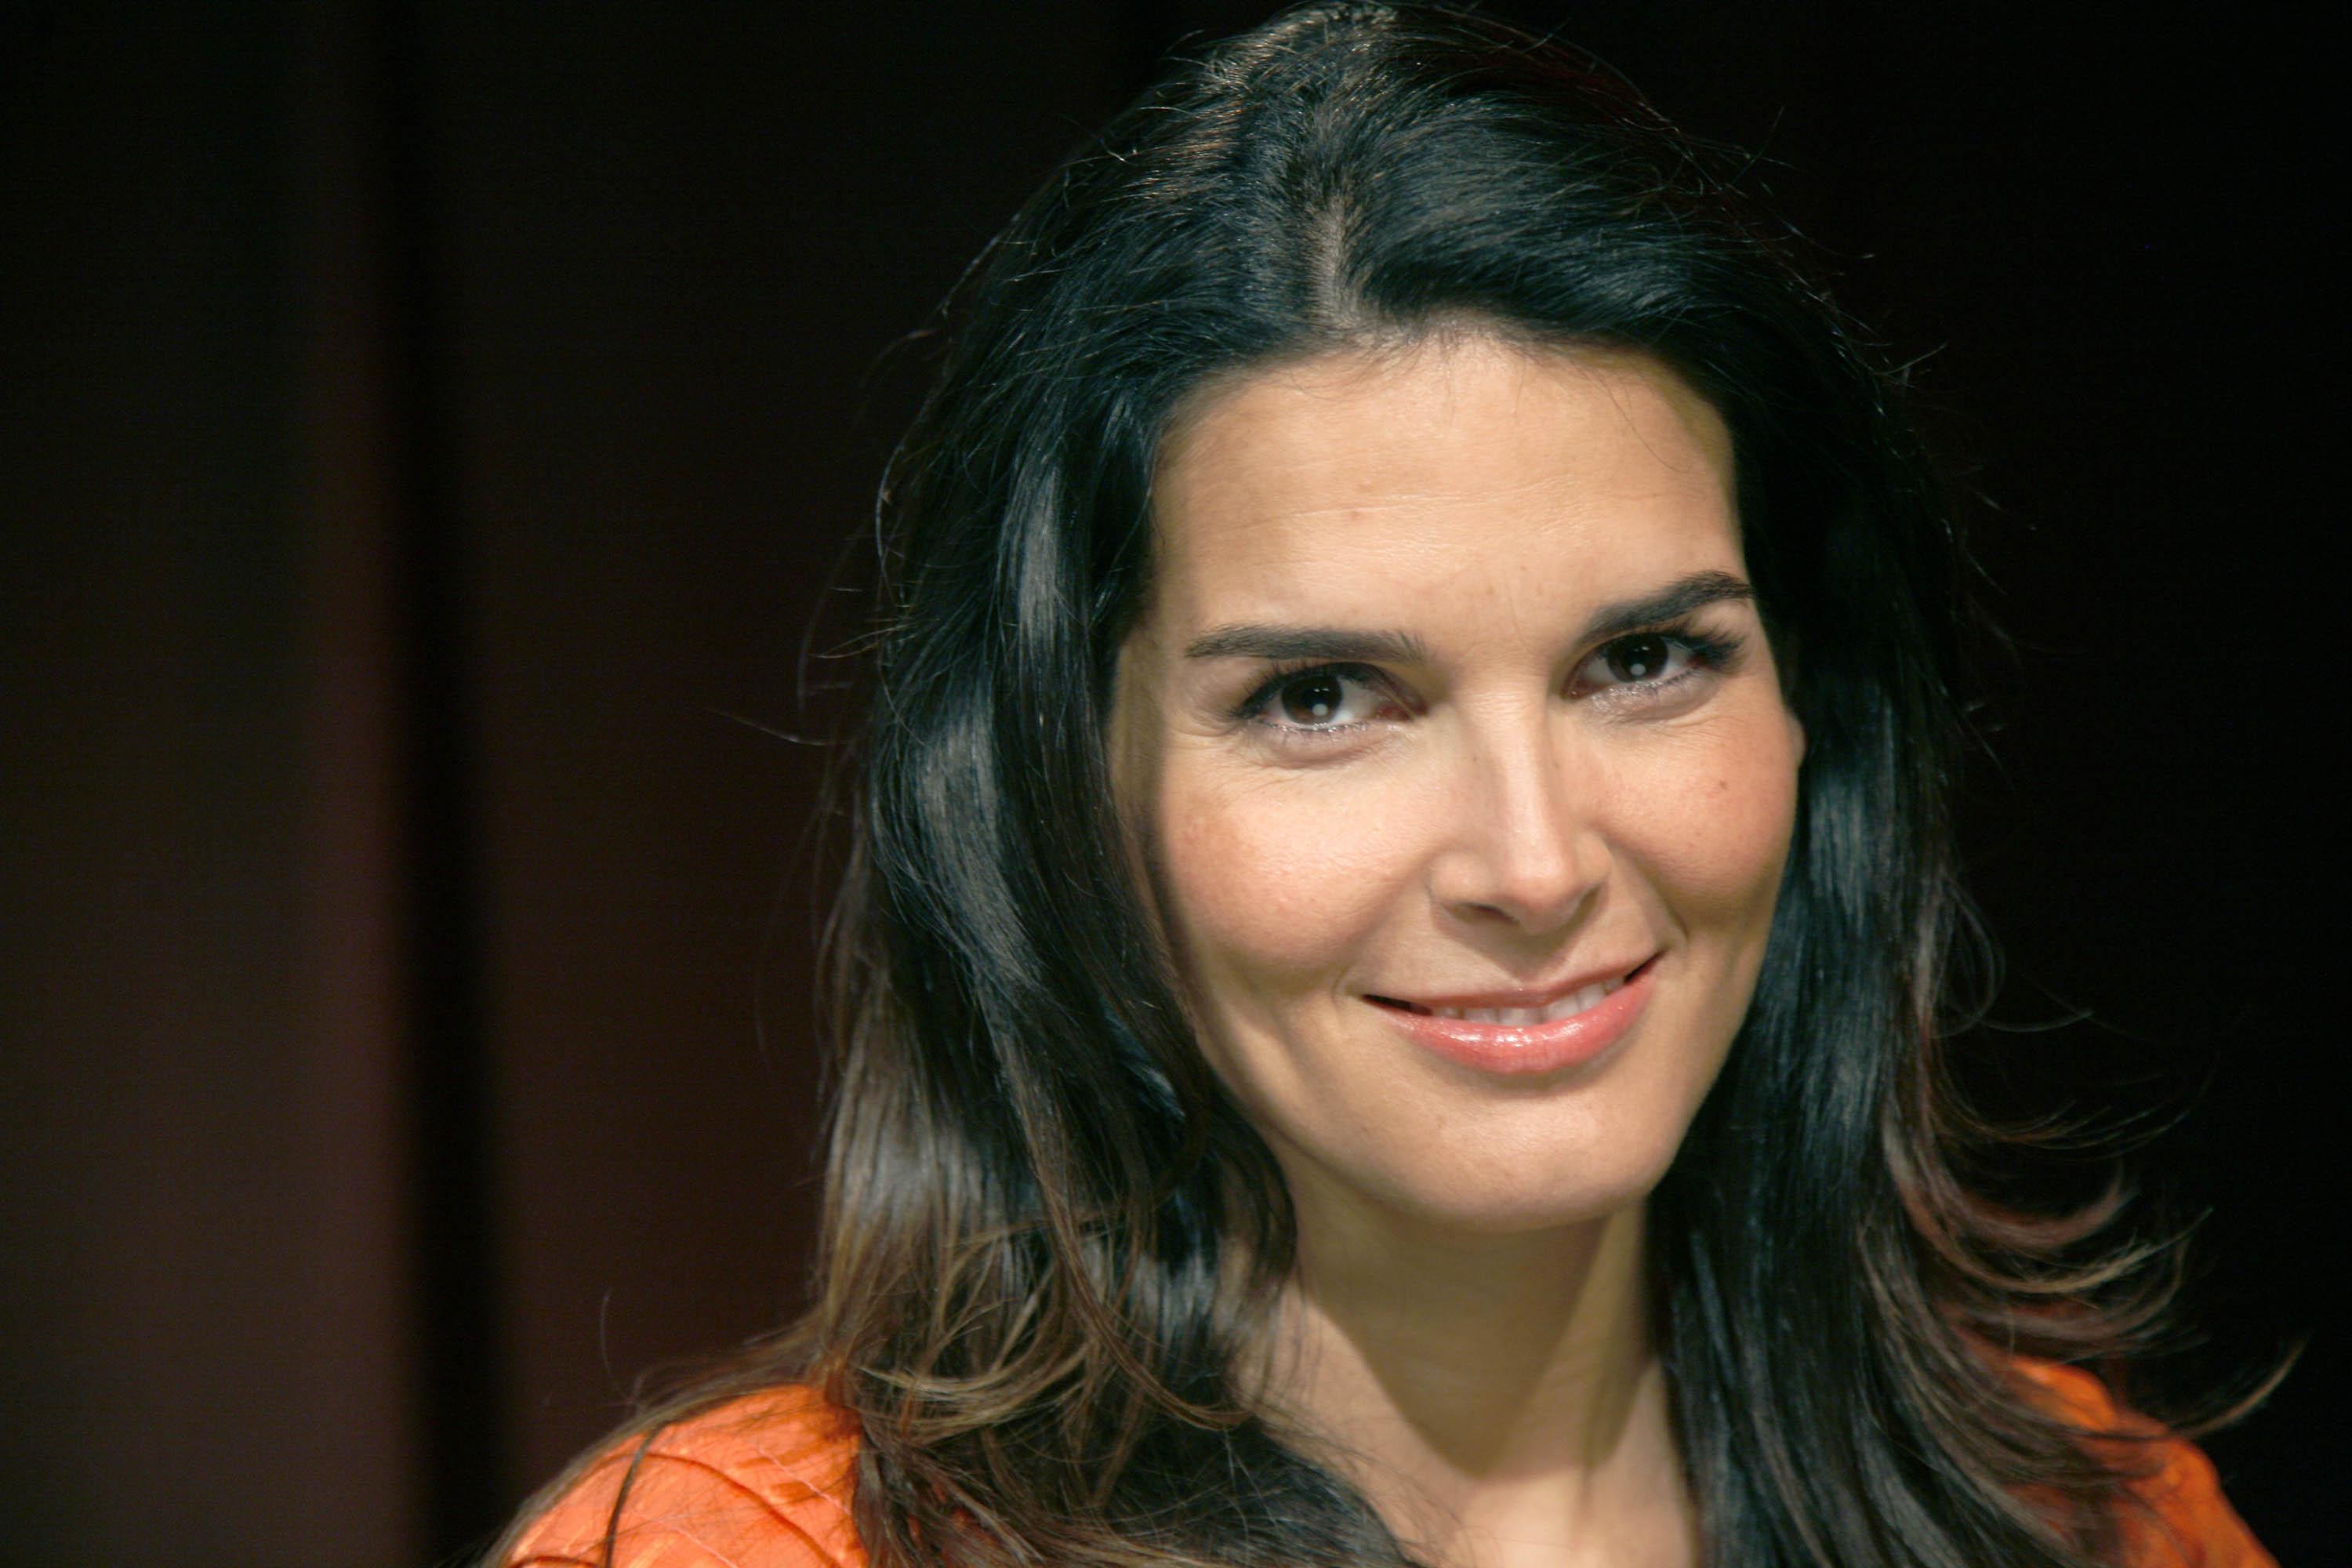 celebrity, angie harmon, actress, brown eyes, brunette, face, smile